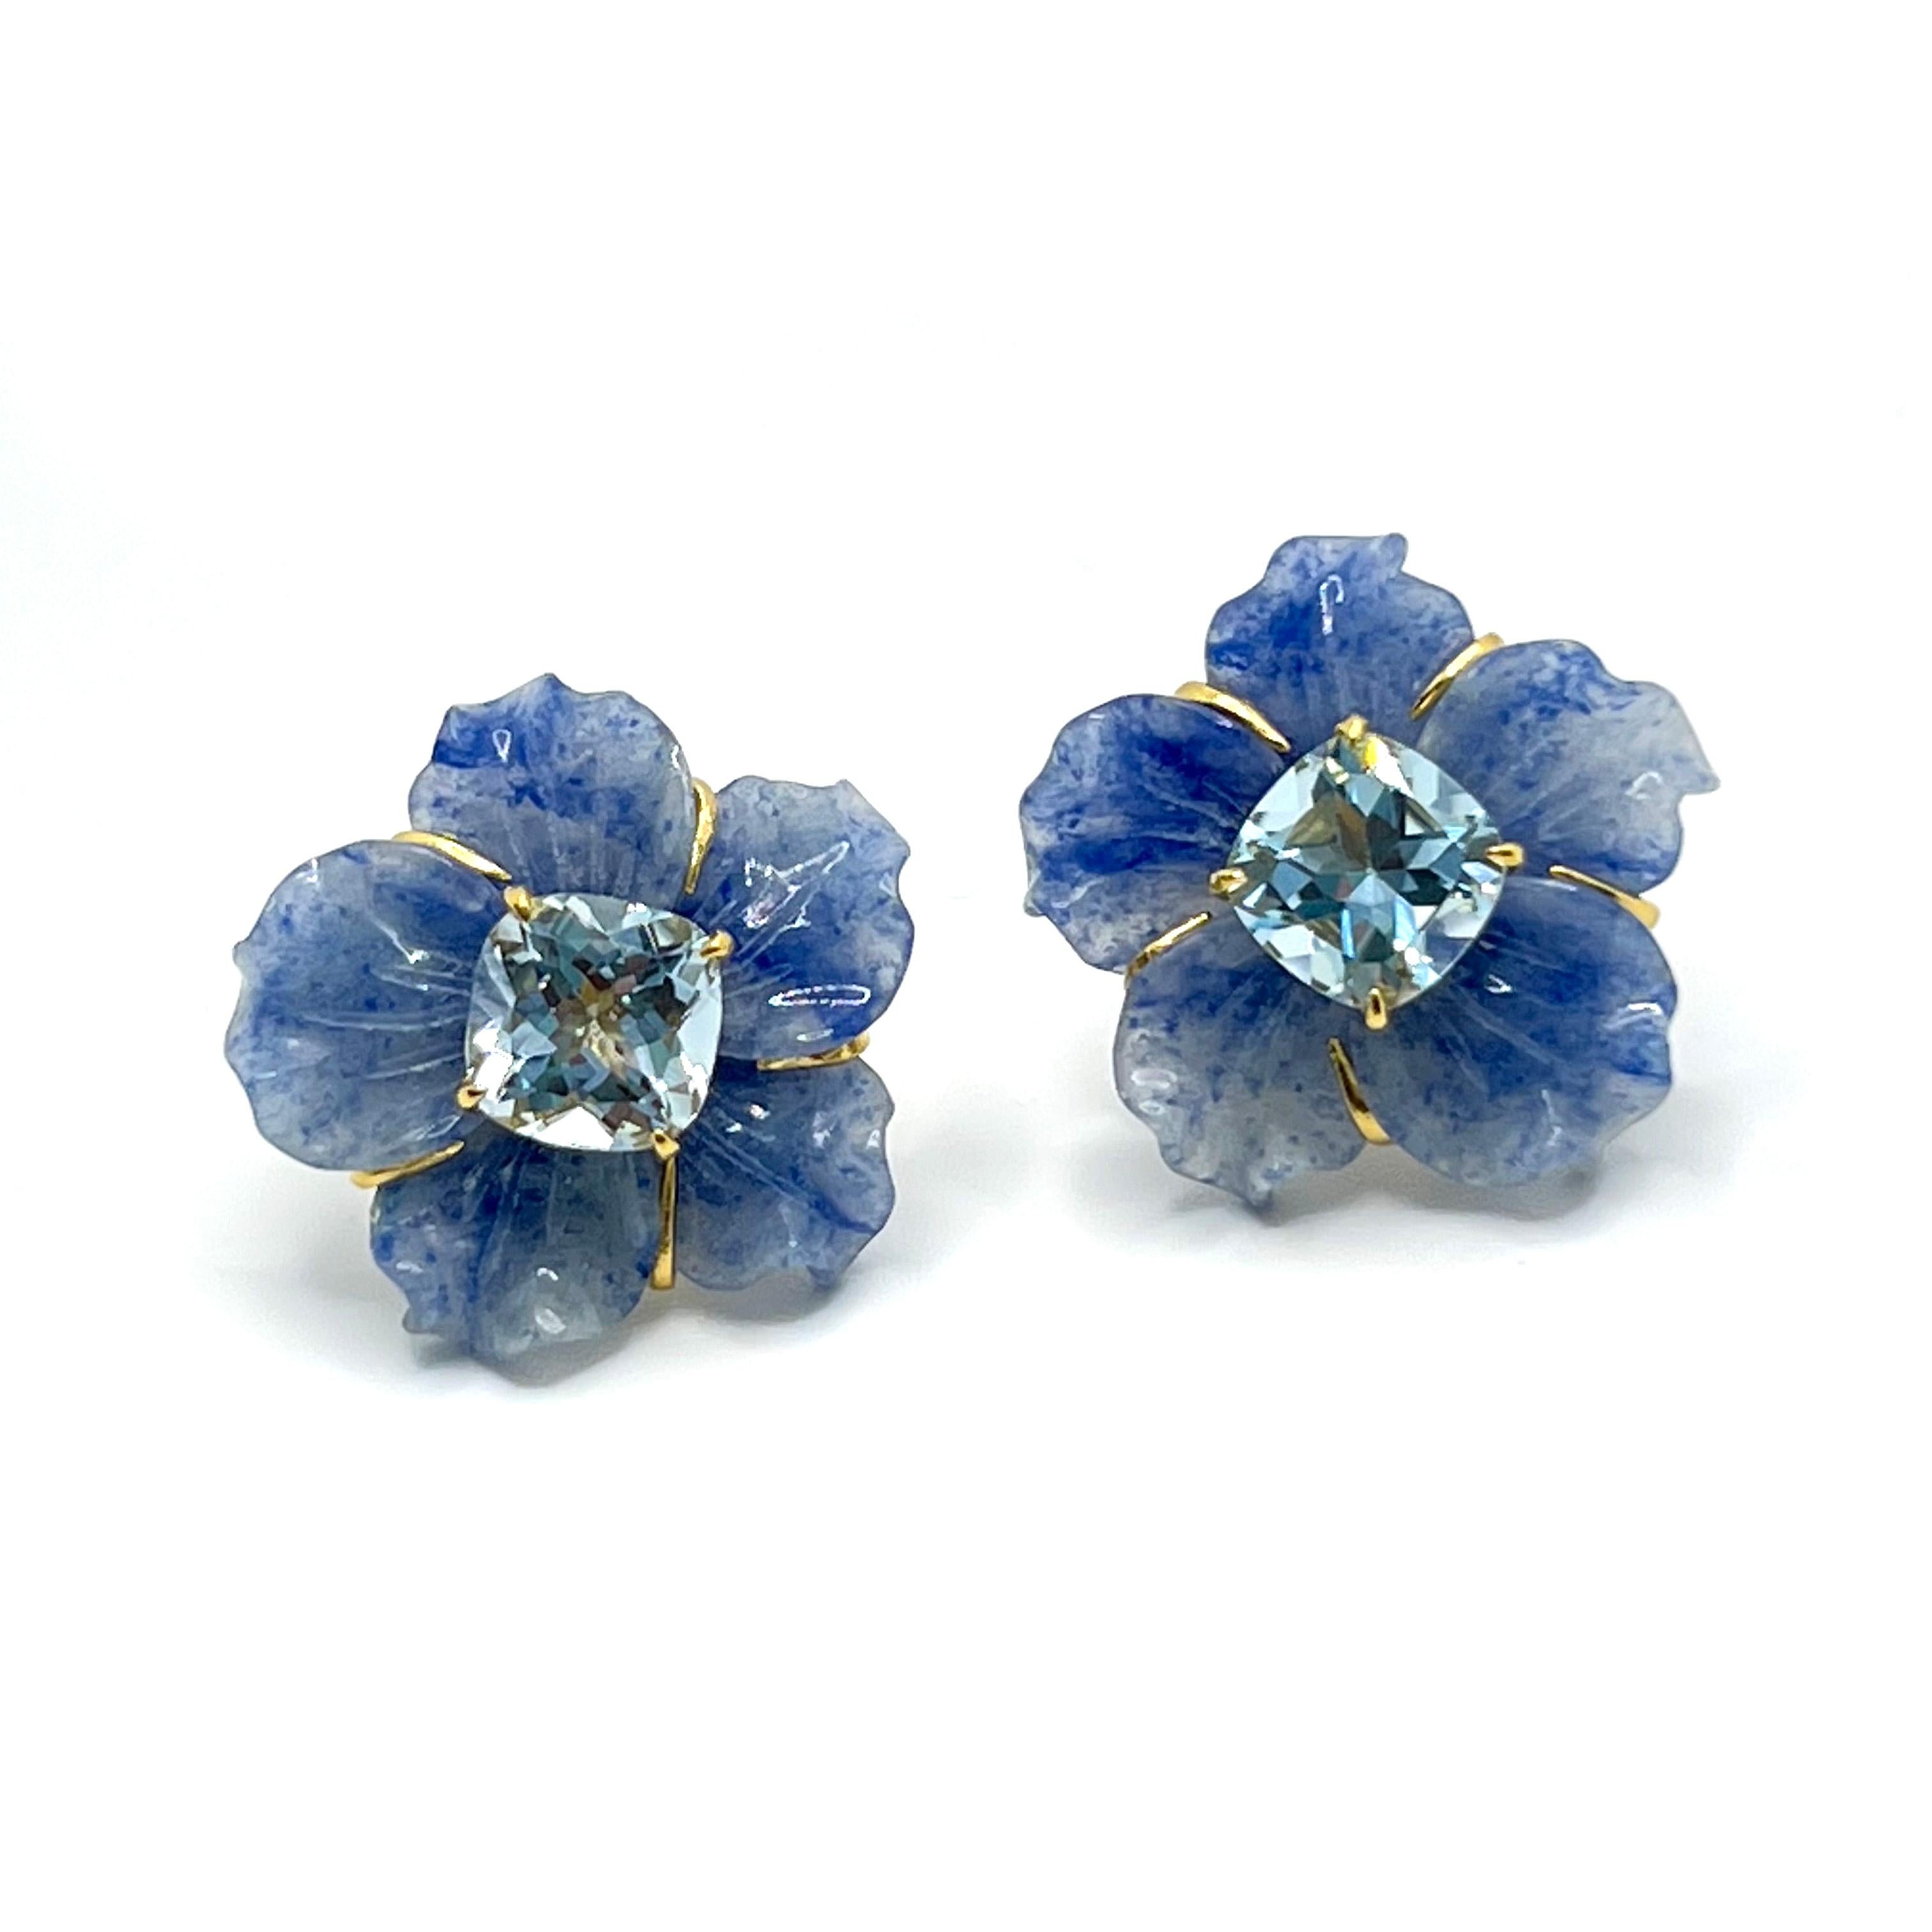 Elegant 24mm Carved Dumortierite Flower and Cushion Blue Topaz Vermeil Earrings

This gorgeous pair of earrings features 24mm dumortierite carved into beautiful three dimension flower, adorned with cushion-cut blue topaz (3 carat size) in the